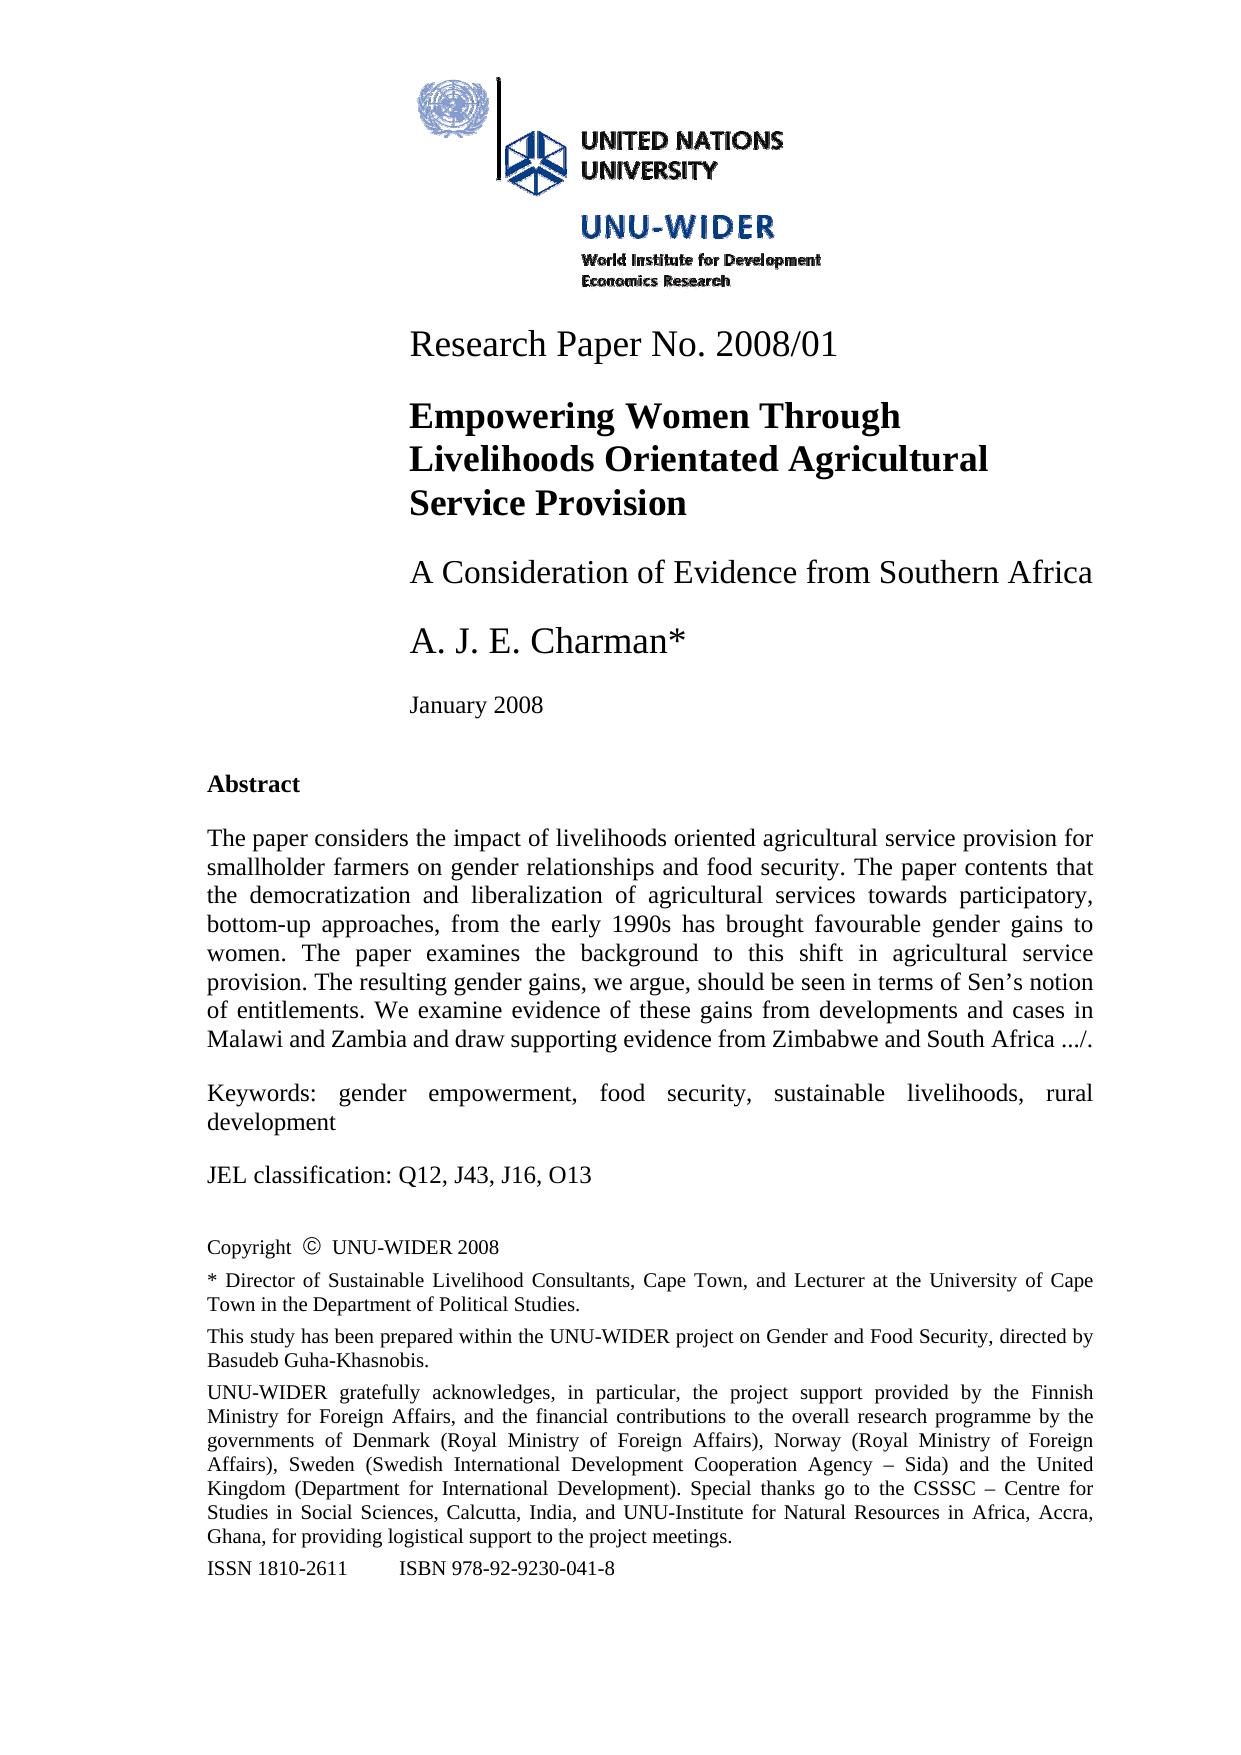 WIDER Research Paper 2008-01 Empowering Women Through Livelihoods Orientated Agricultural Service Provision: A Consideration of Evidence from Southern Africa